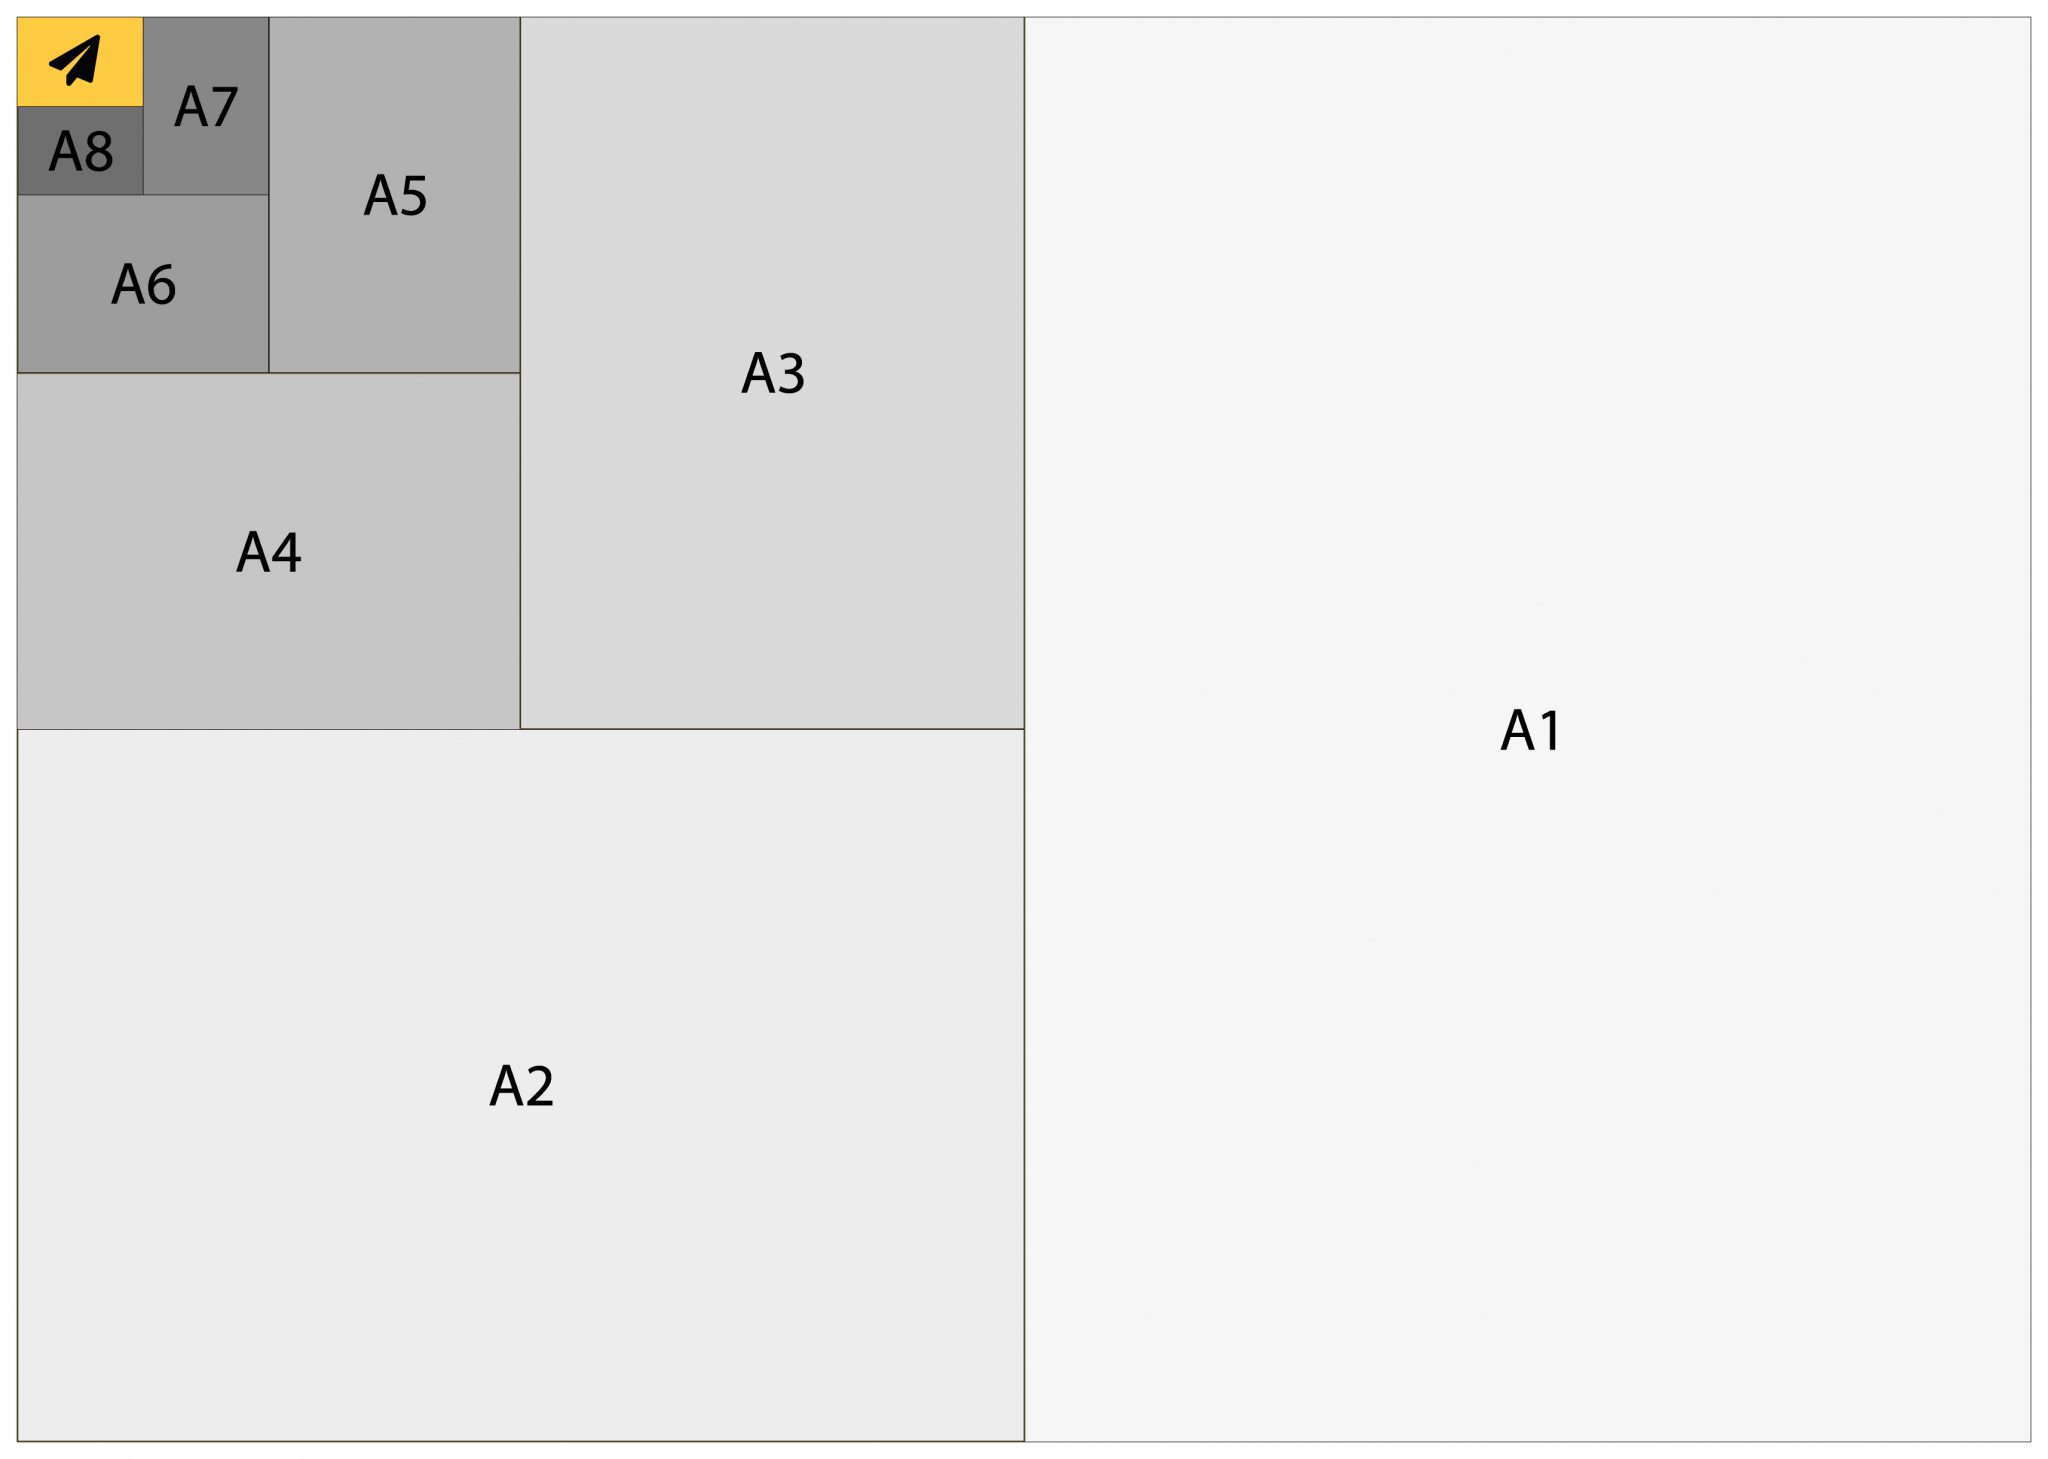 International paper sizes. The ISO 216 A, B, C-standard.